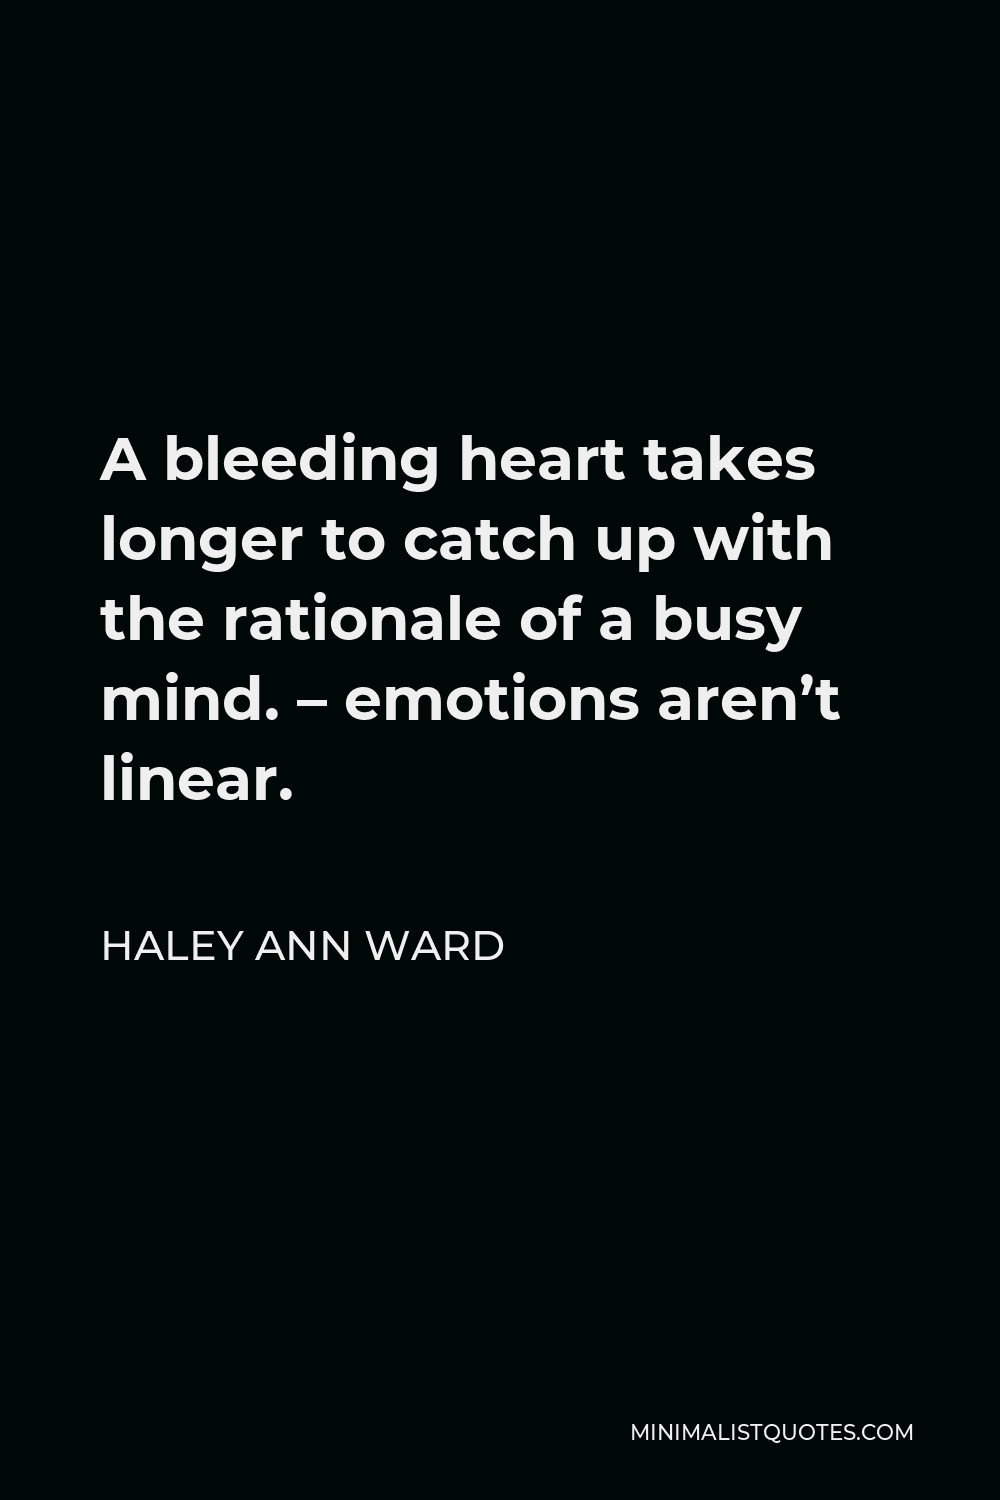 Haley Ann Ward Quote - A bleeding heart takes longer to catch up with the rationale of a busy mind. – emotions aren’t linear.